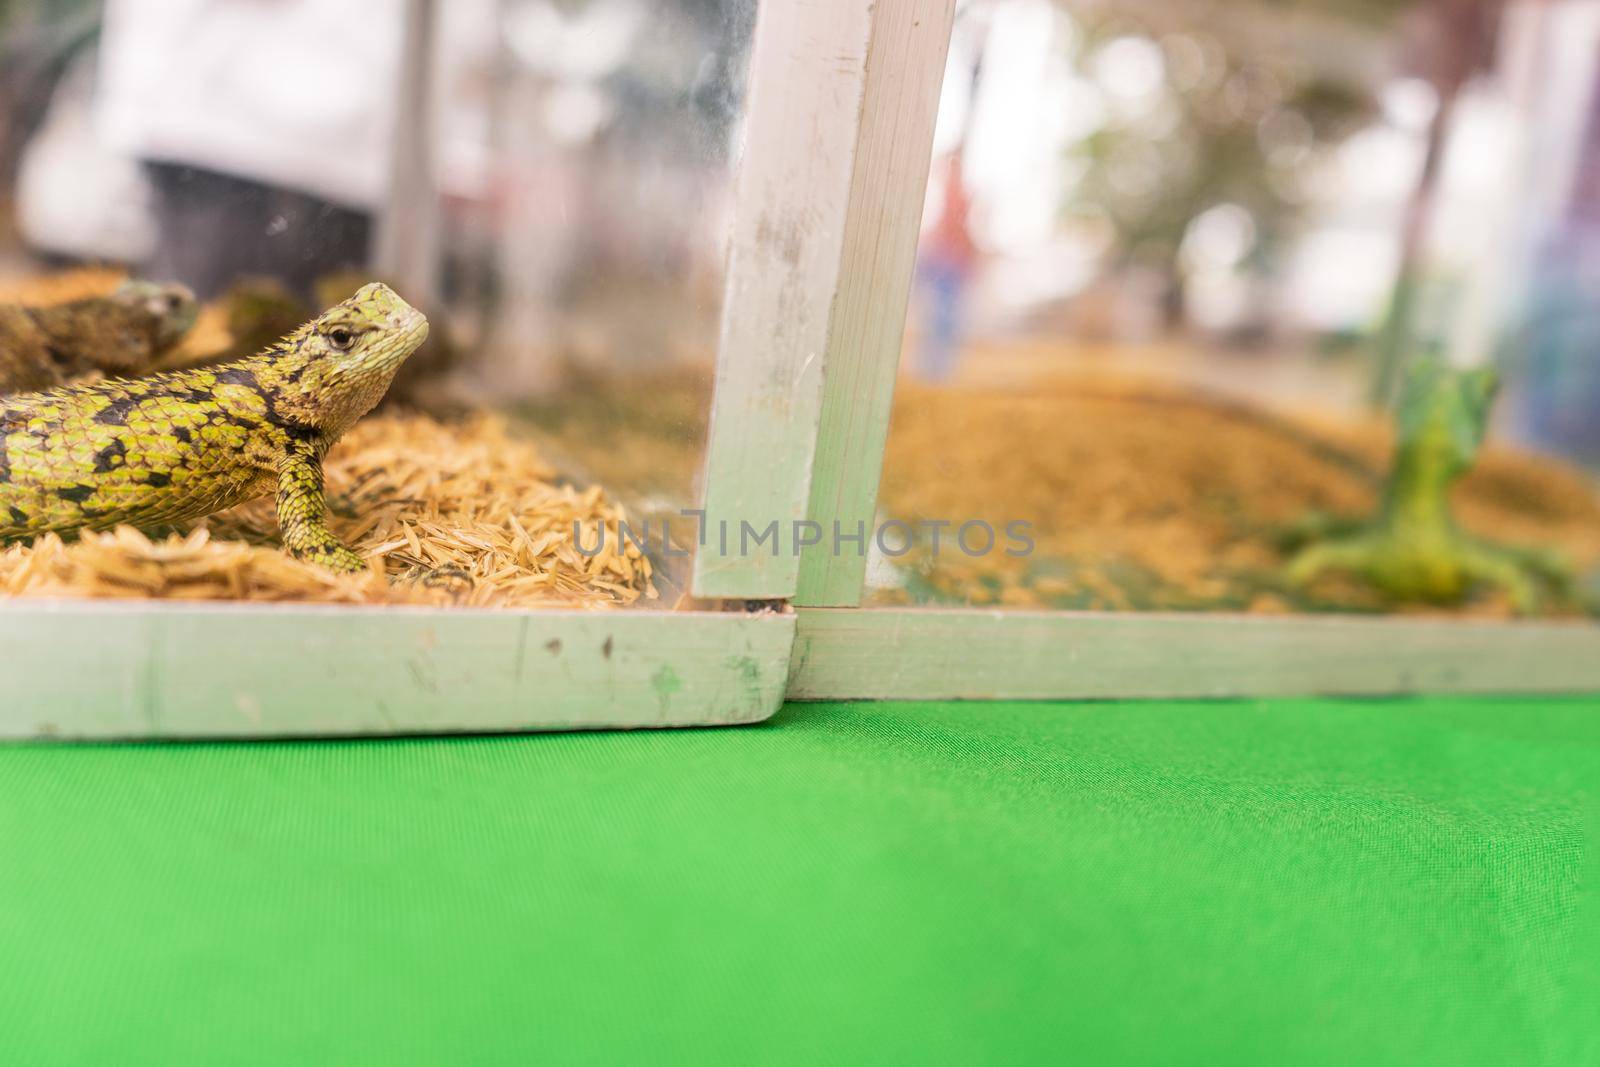 Pet spiny lizard in a glass tank for sale at an exotic animal market in Managua Nicaragua